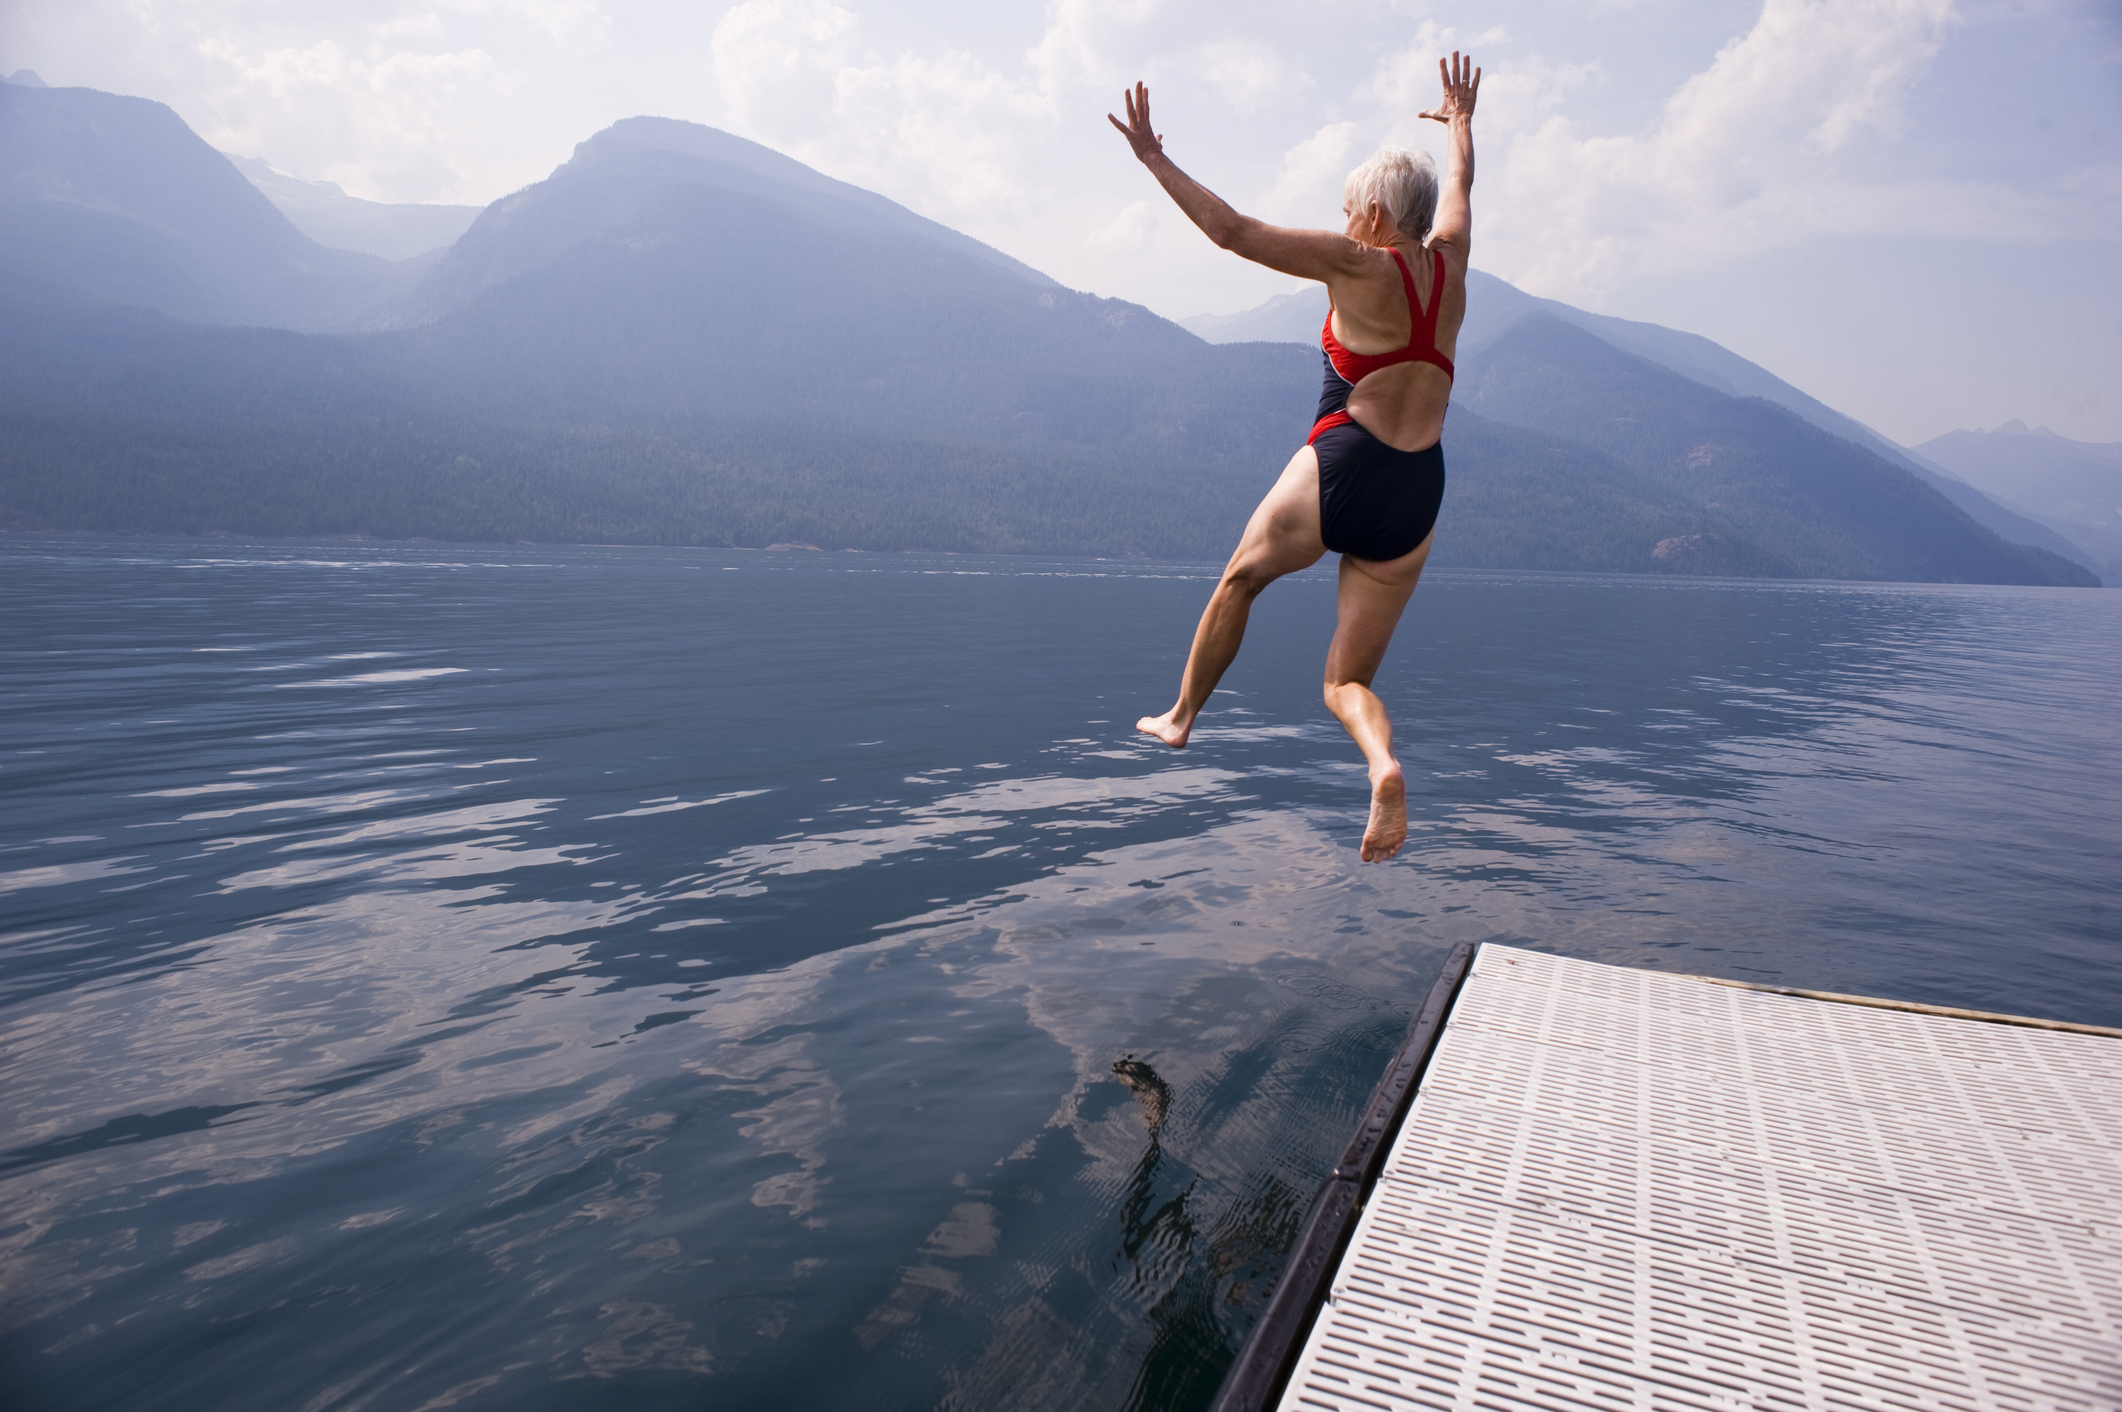 Person in a swimsuit joyfully jumps off a dock into a lake, with mountains visible in the background